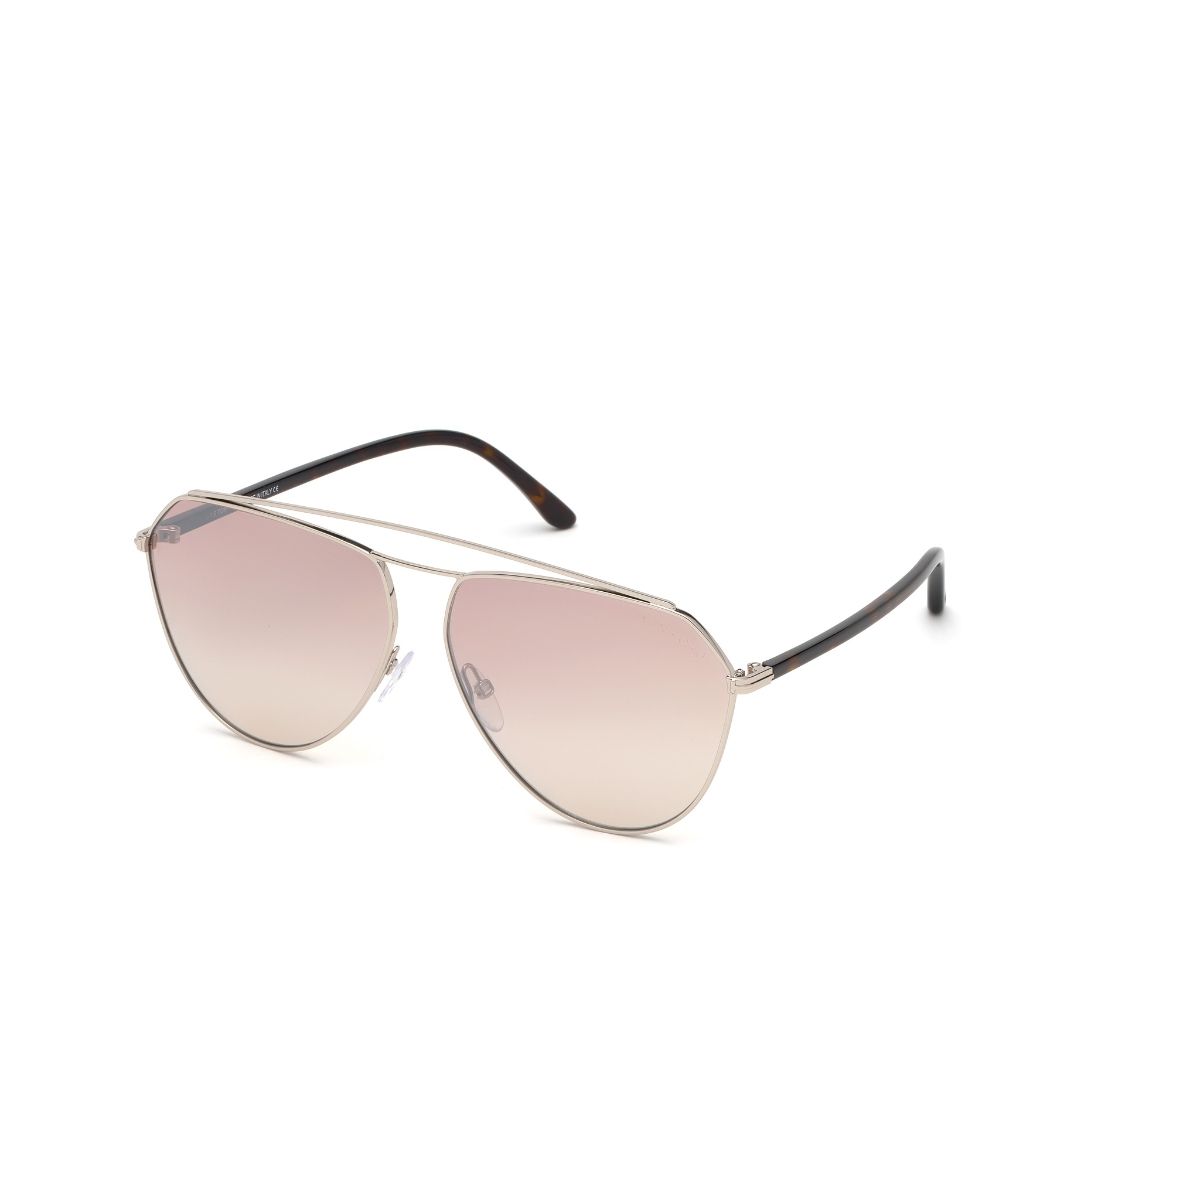 Tom Ford FT0681 63 16g Iconic Beveled Shapes In Premium Metal Sunglasses:  Buy Tom Ford FT0681 63 16g Iconic Beveled Shapes In Premium Metal  Sunglasses Online at Best Price in India | Nykaa